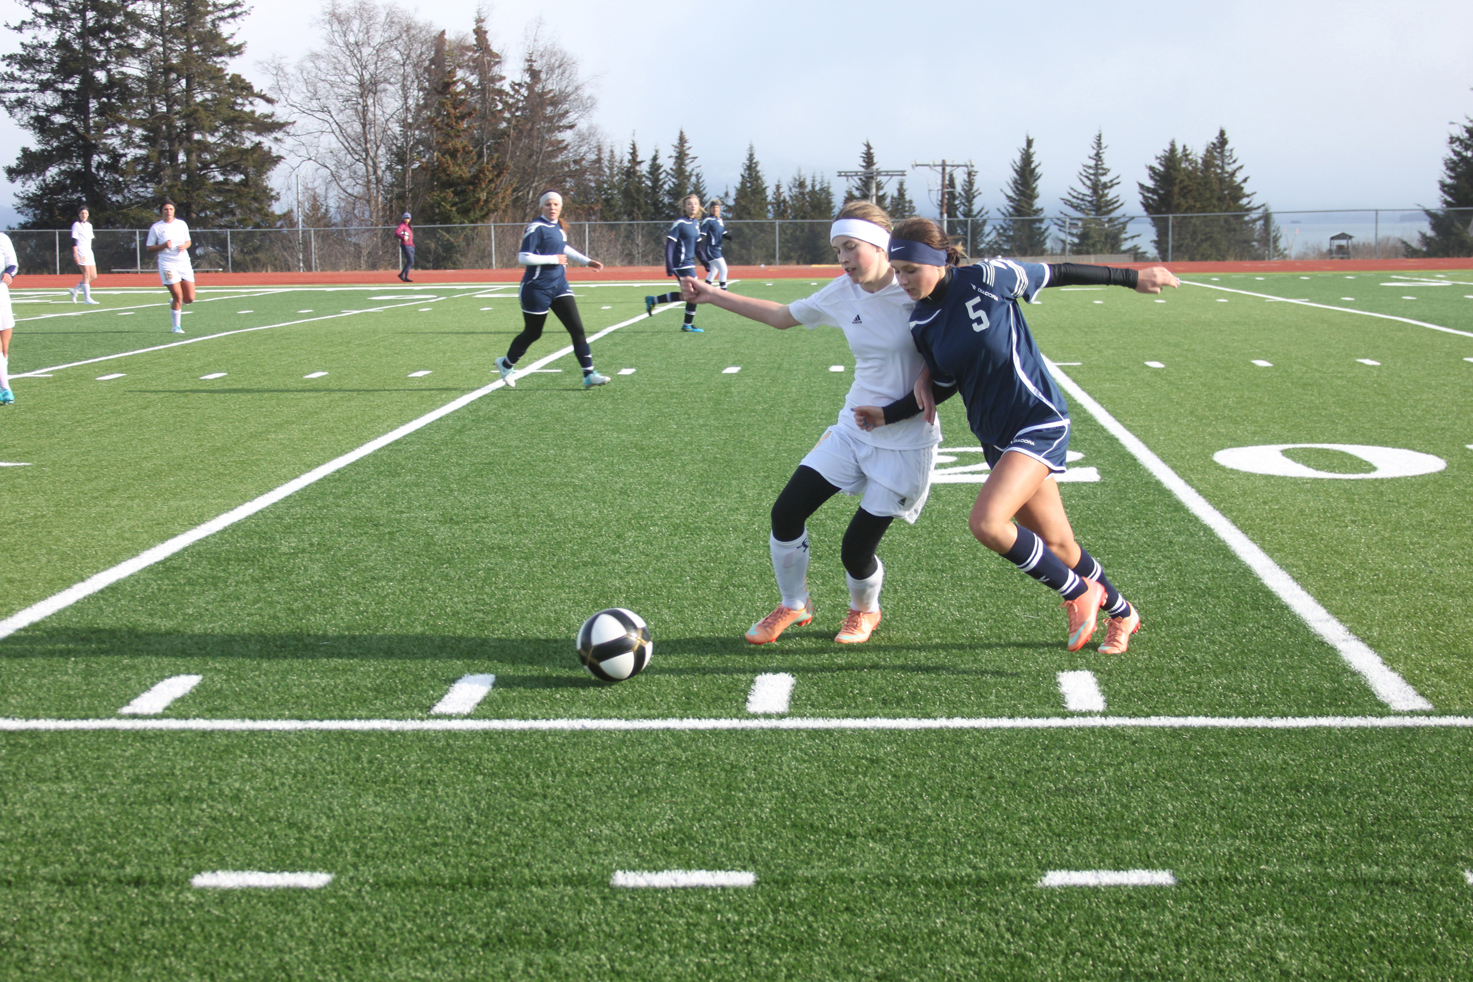 Homer High School freshman Andie Sonnen works to gain ground against a SoHi midfielder during the Mariner-hosted game on Tuesday.